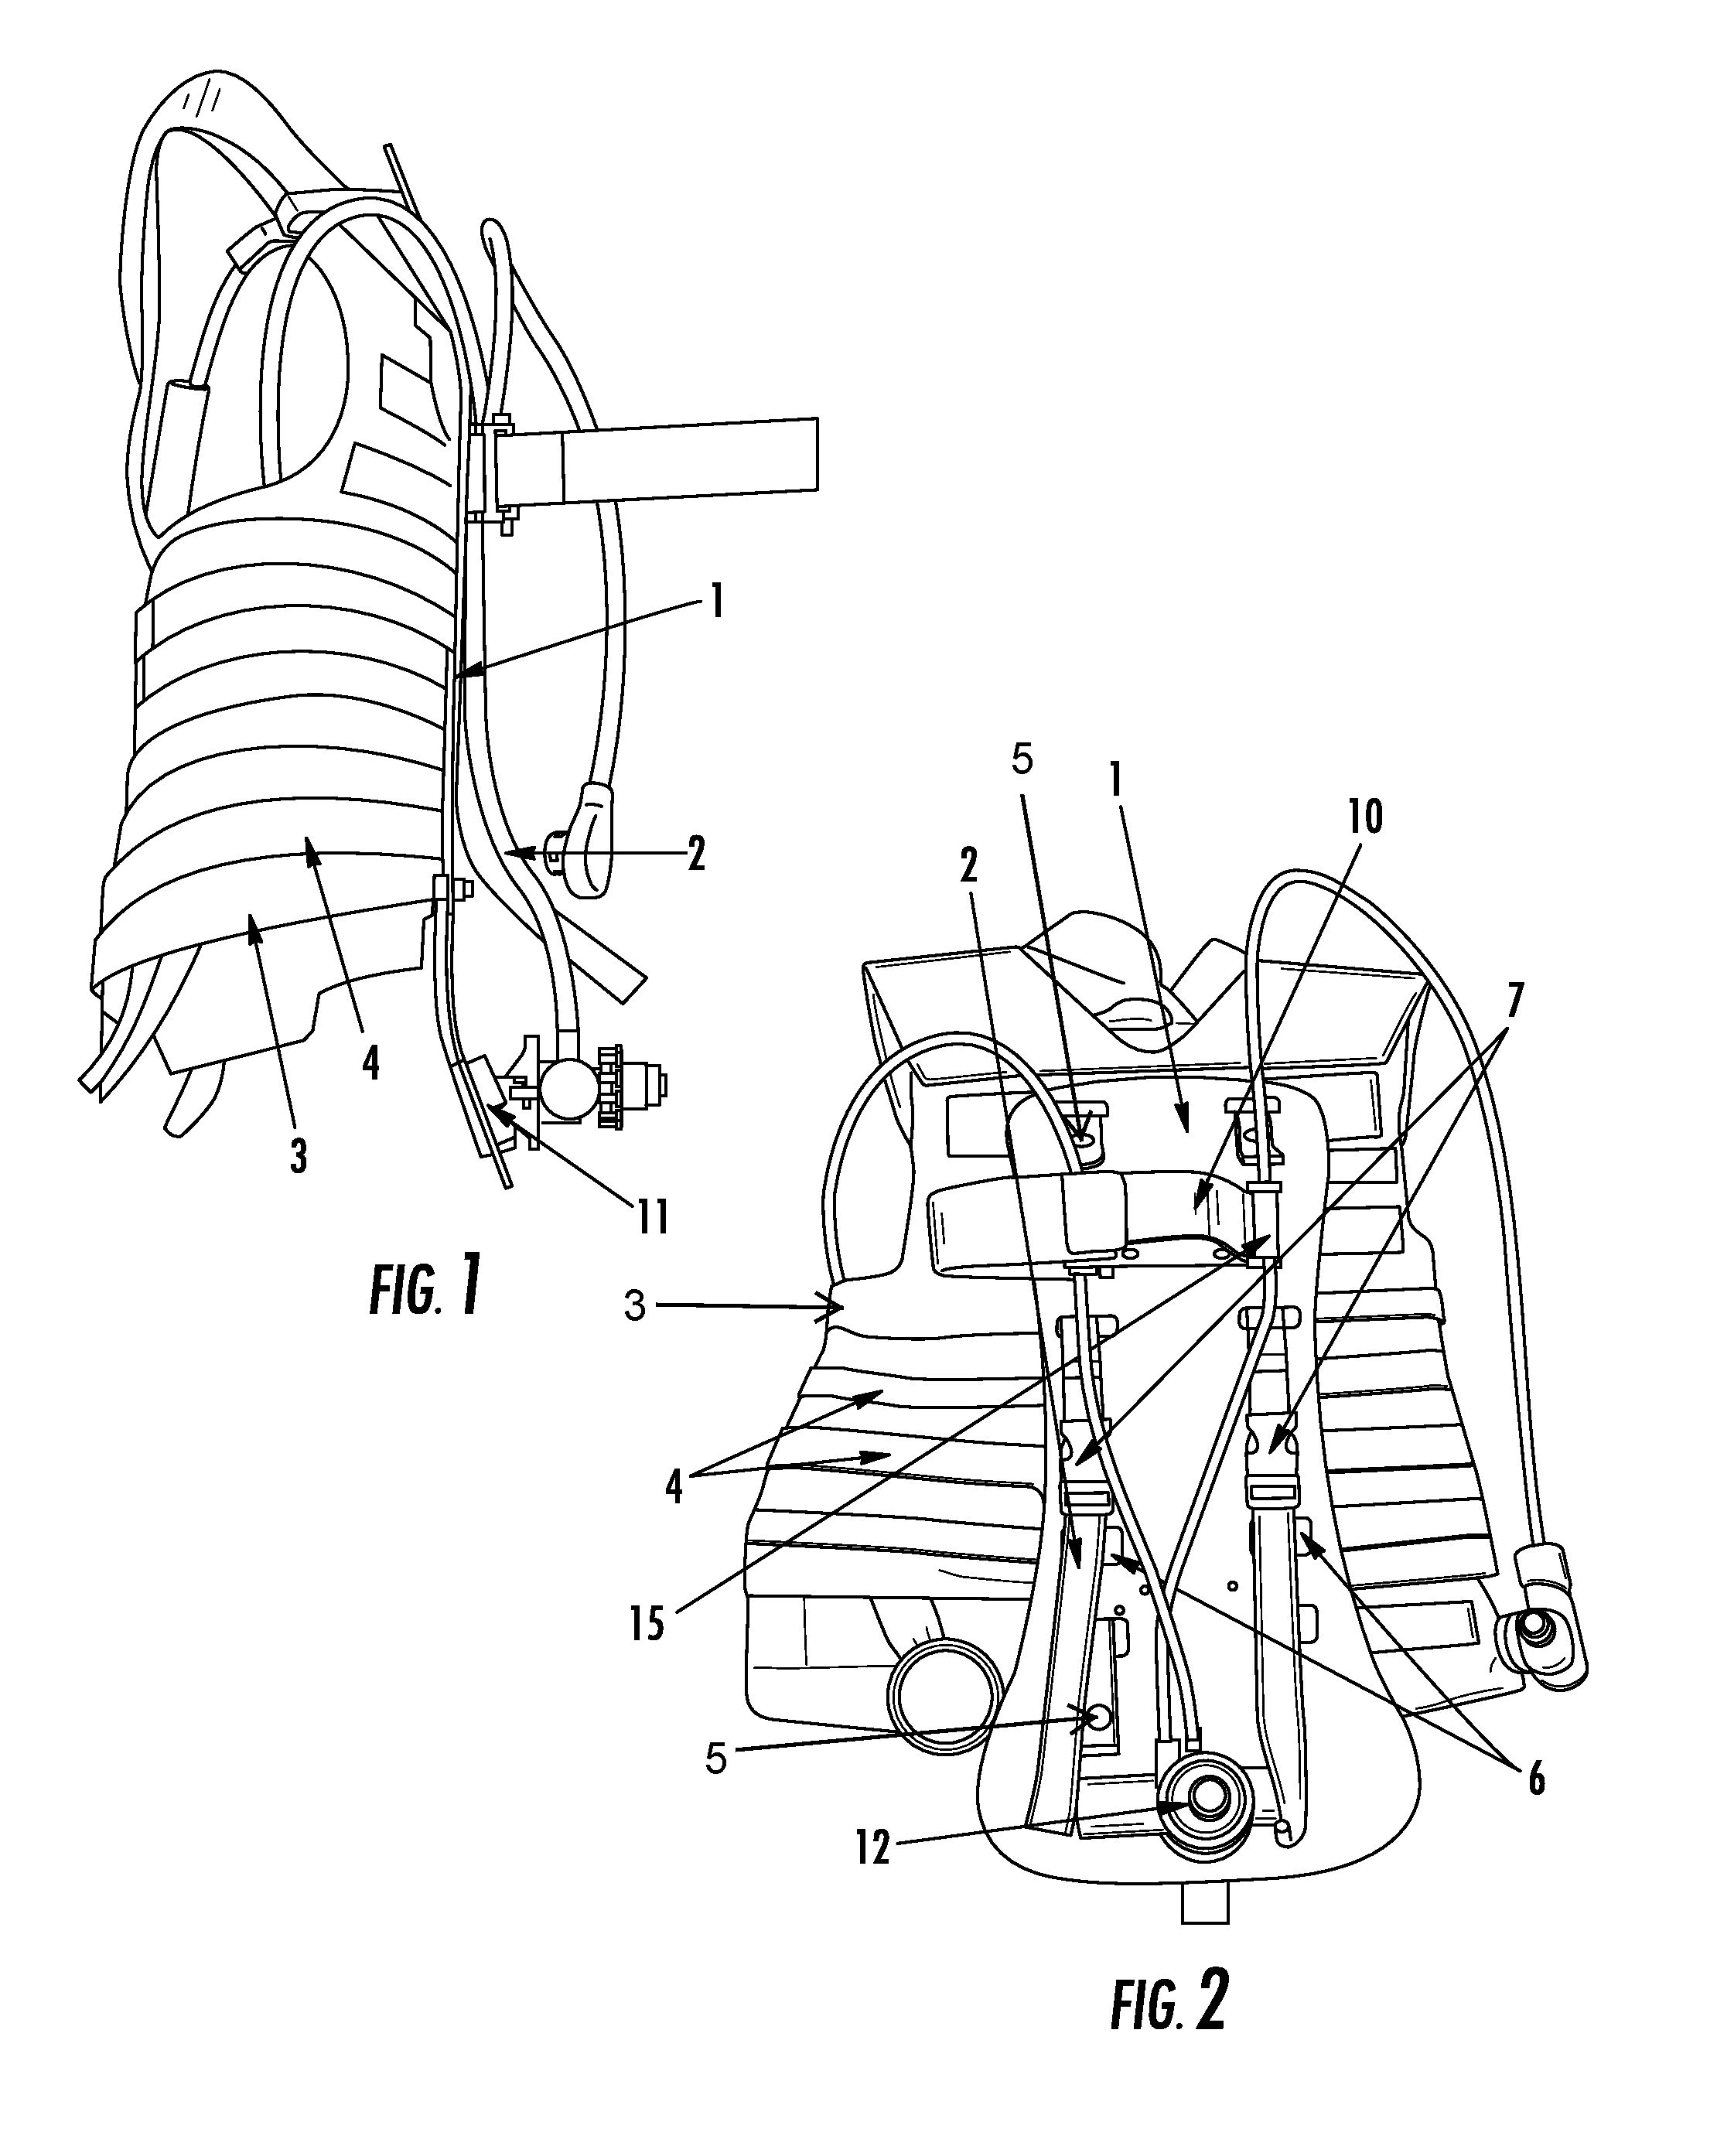 Carrying plate for breathing apparatus